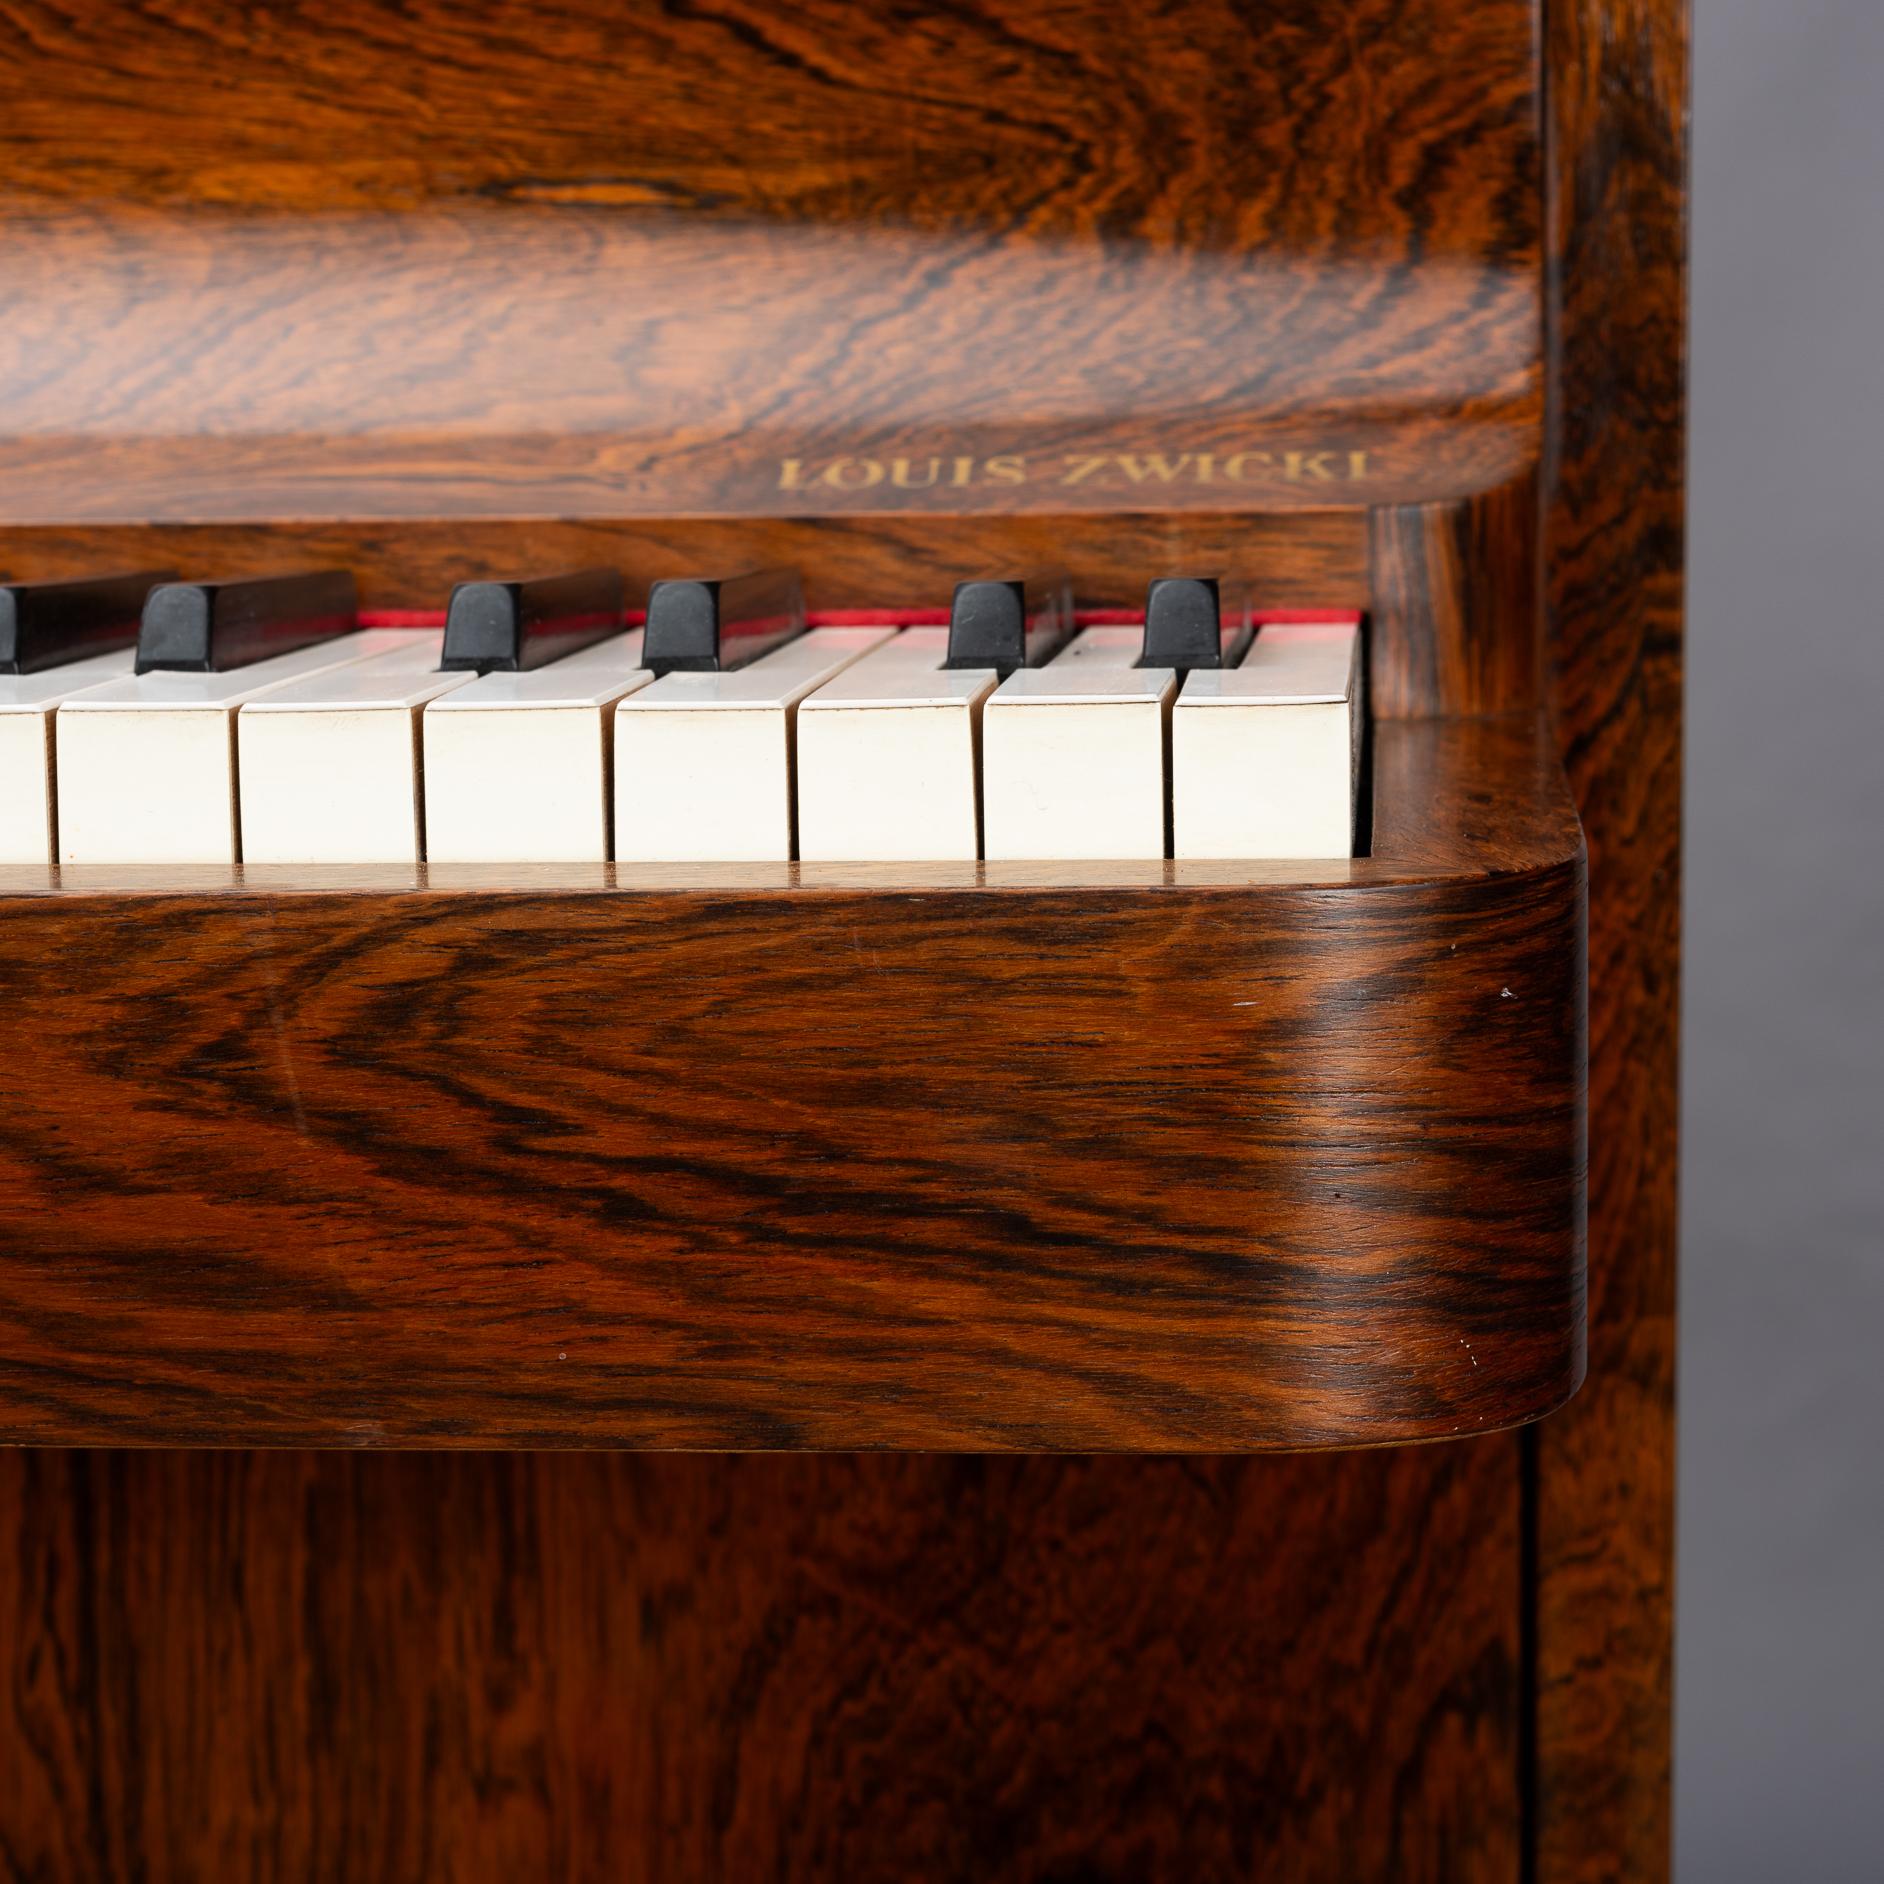 Danish Design Midcentury Rosewood Pianette by Louis Zwicki, 1950s For Sale 9